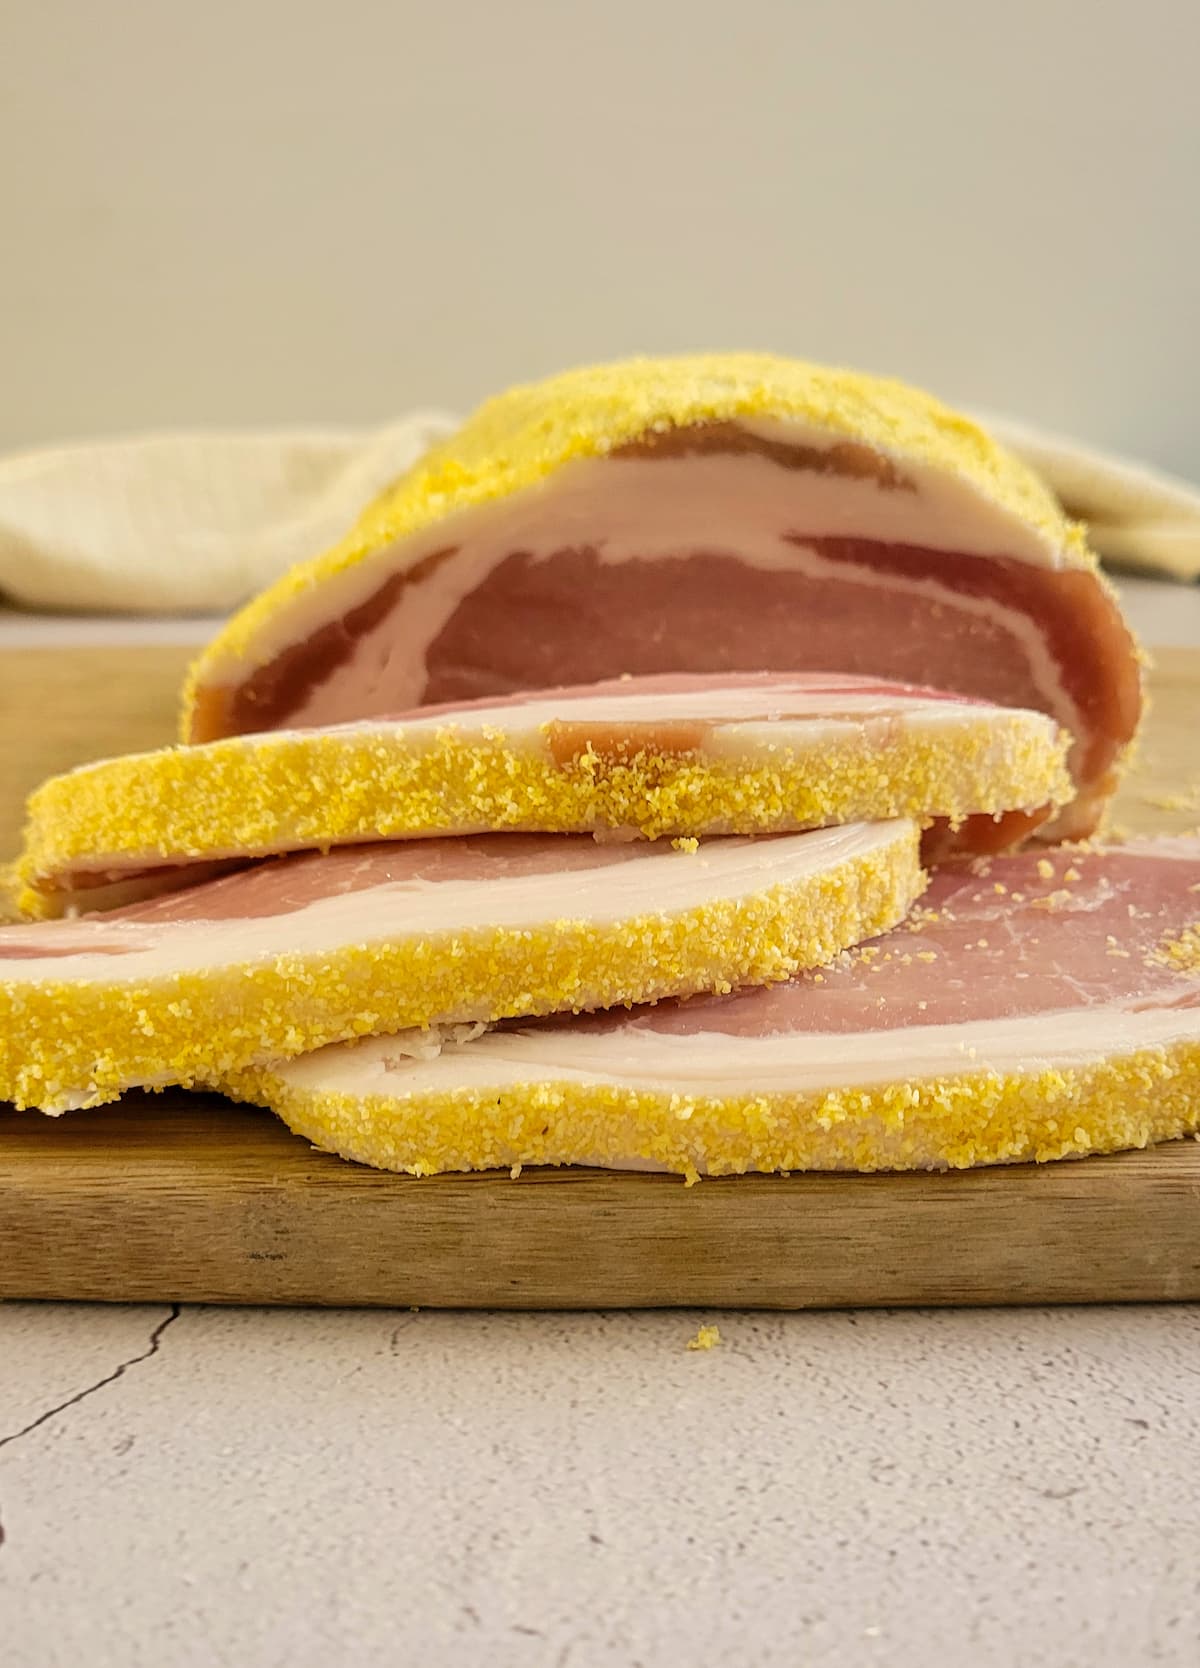 peameal bacon slices and whole loin on a cutting board